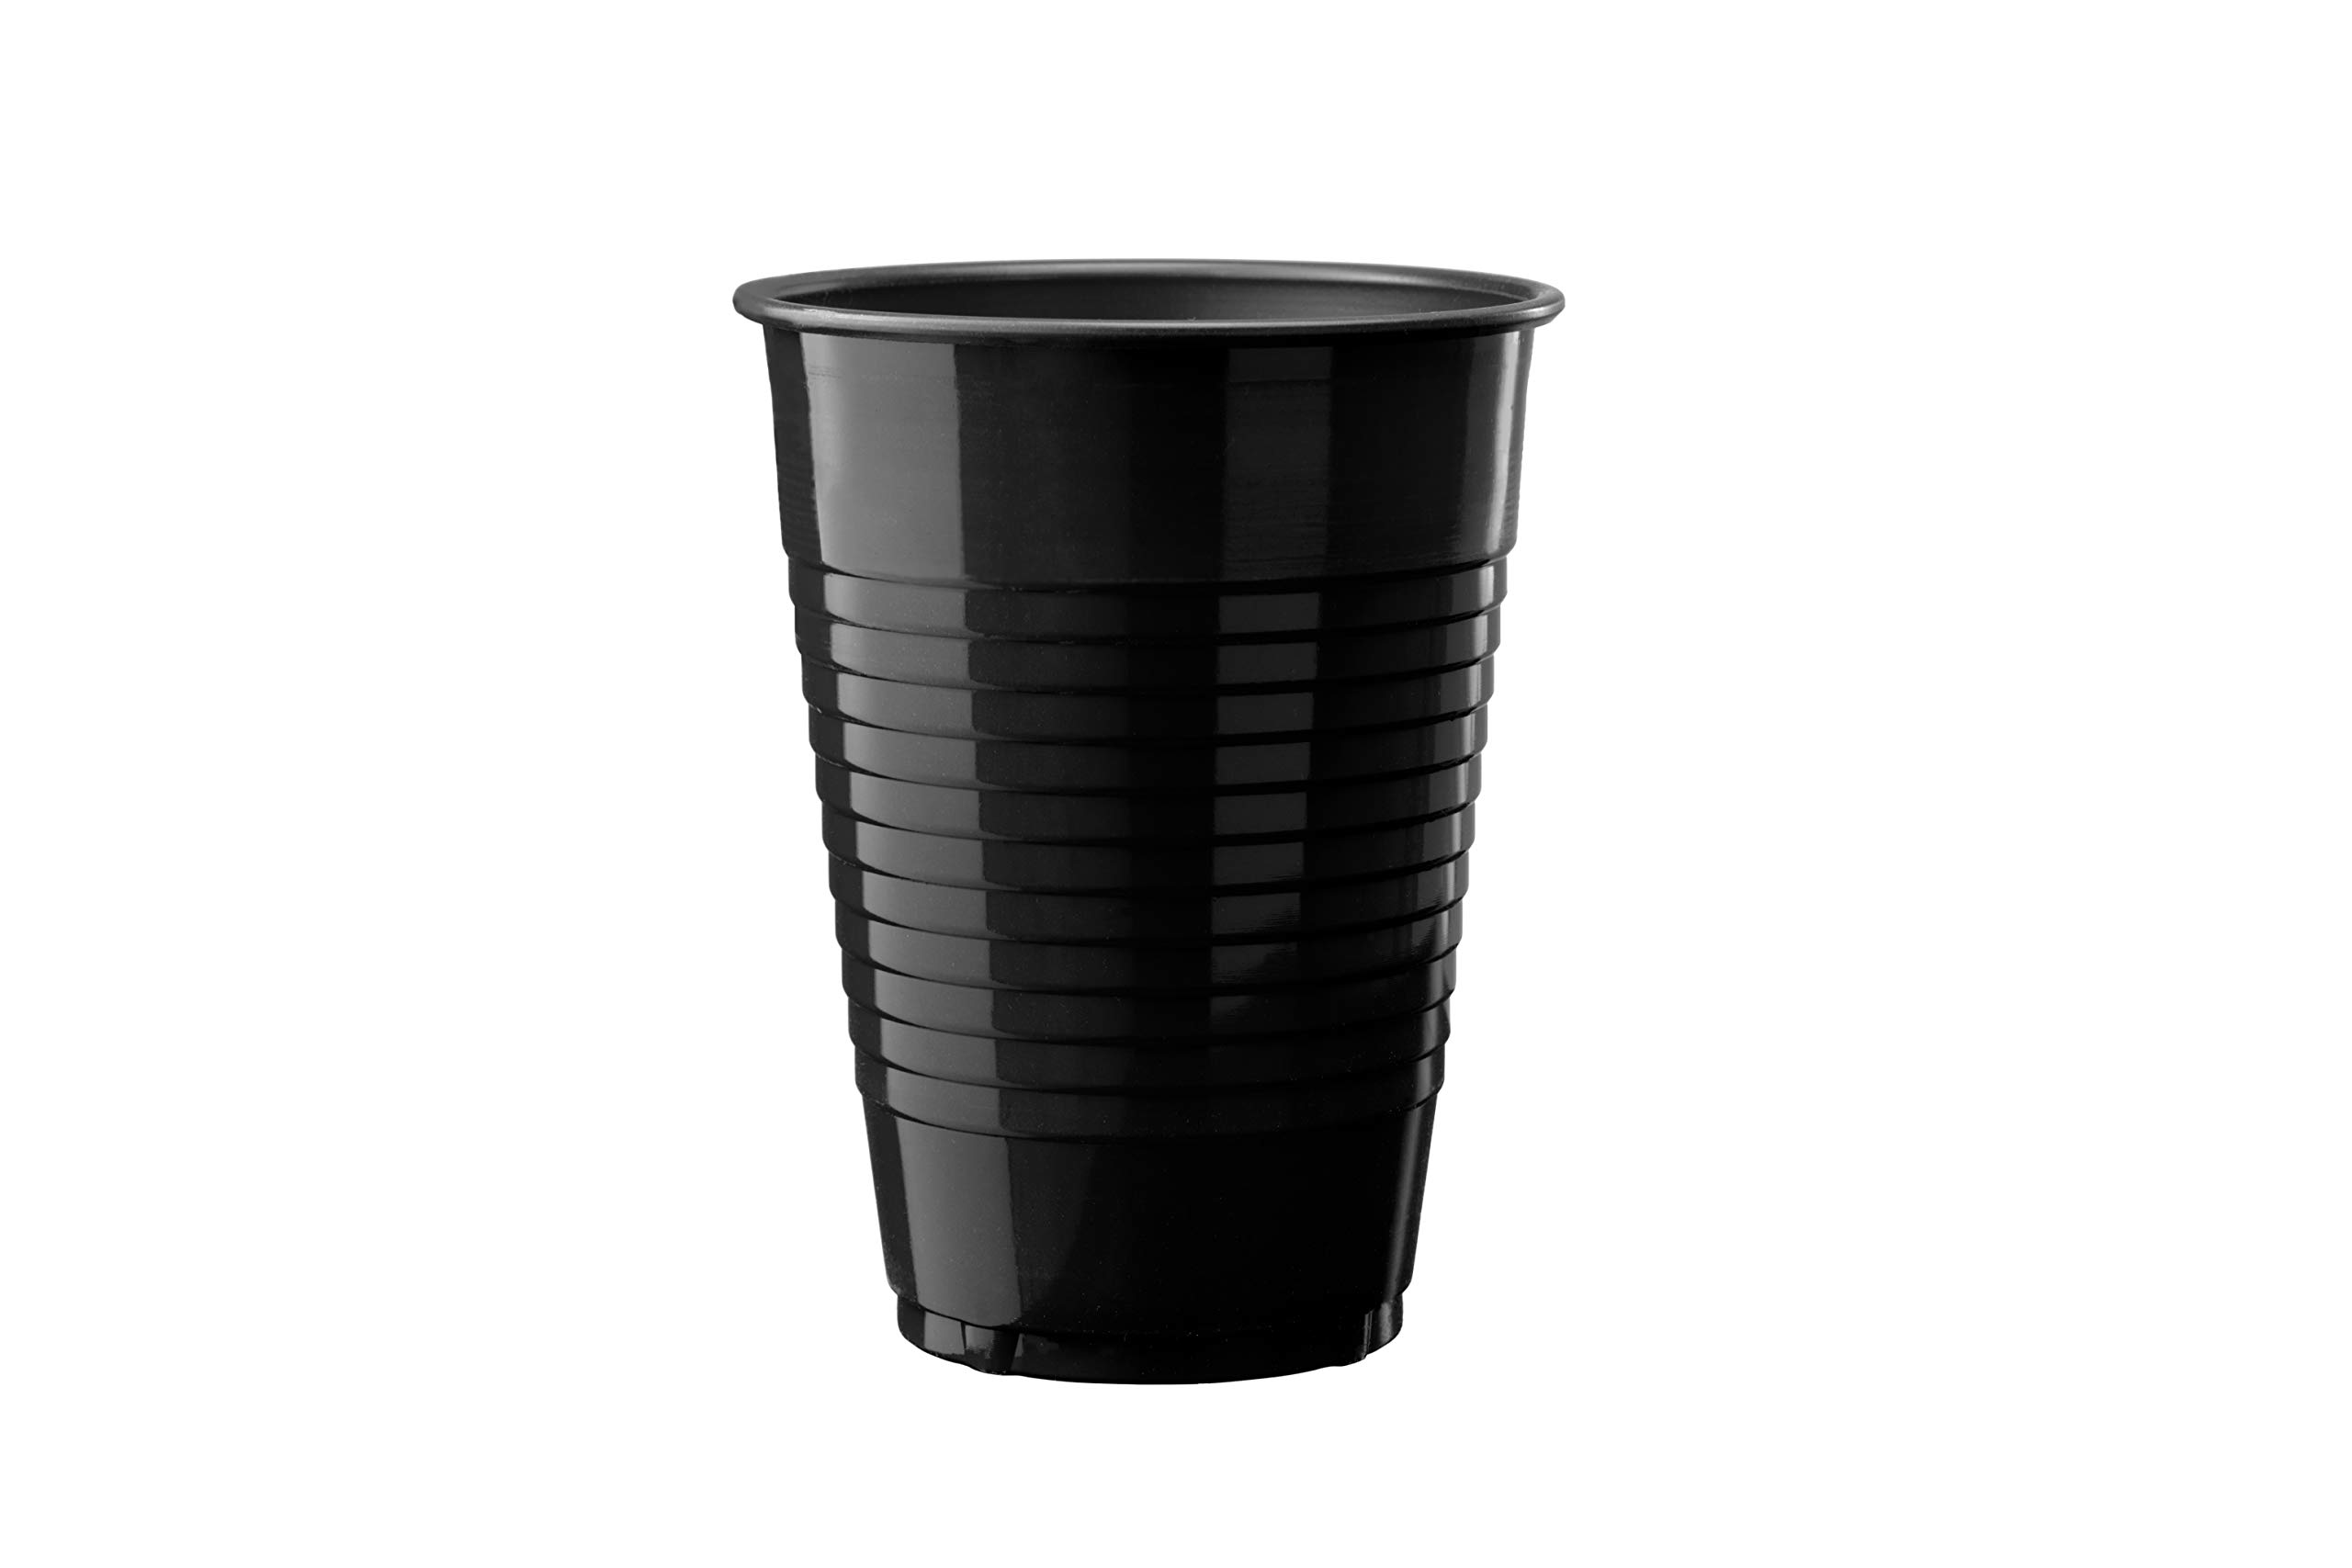 Exquisite 50 Count - Black 12 Oz Plastic Cups Disposable Party Cups - Black  Plastic Tumblers For All Occasions With 50 Black Disposable Plastic Cups  Per Pack 50 Count (Pack of 1) Black